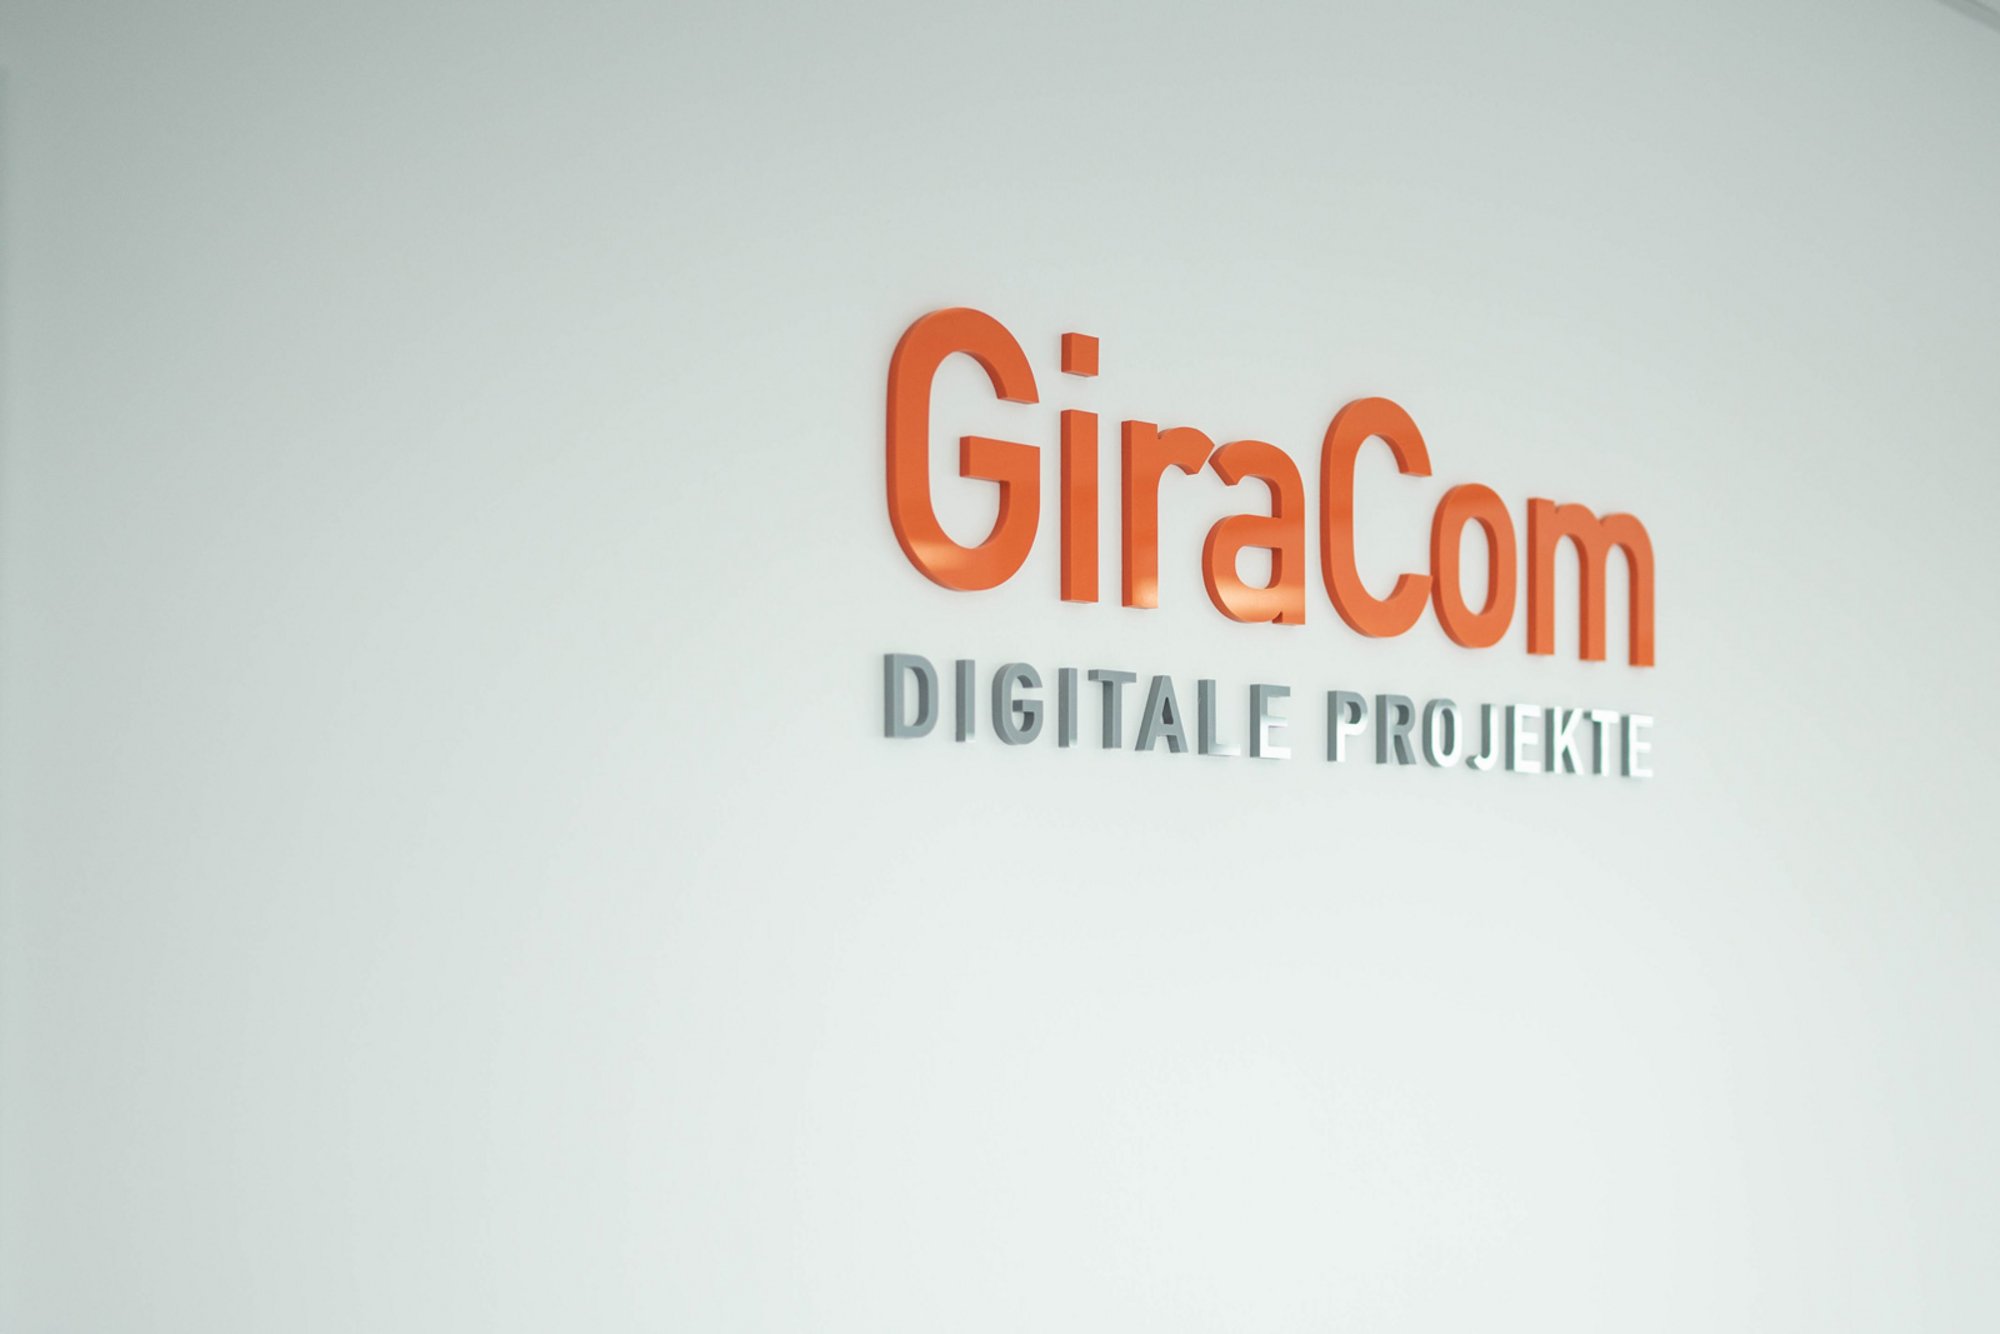 GiraCom wall labelling